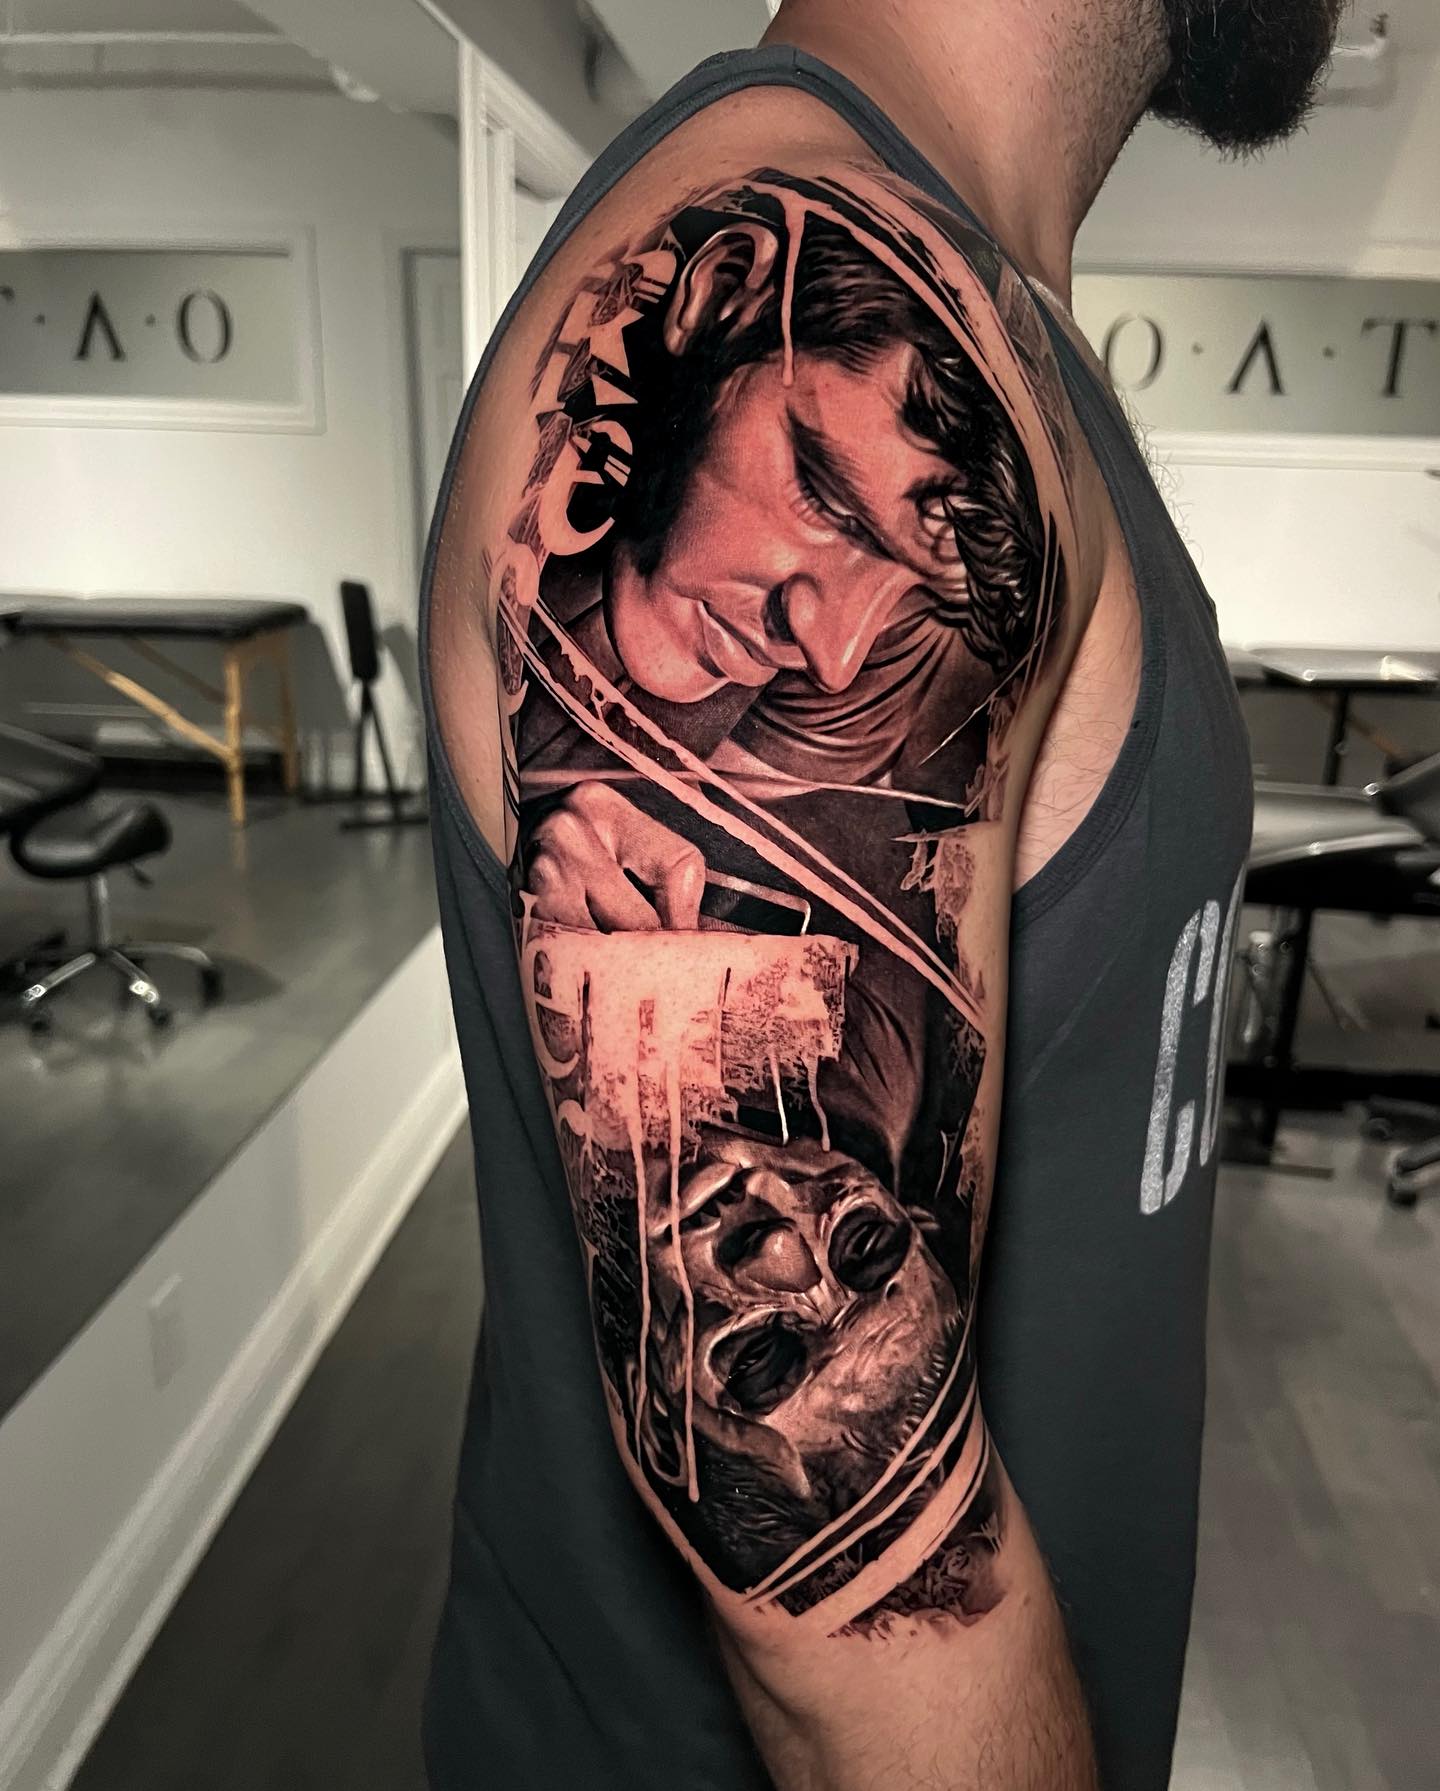 Ossian Staraj Tattoo - Greco-Roman sleeve in progress. Half healed half  fresh. Colosseum from today's story is the outside part of same arm :)  Can't wait continue on upper arm to finally